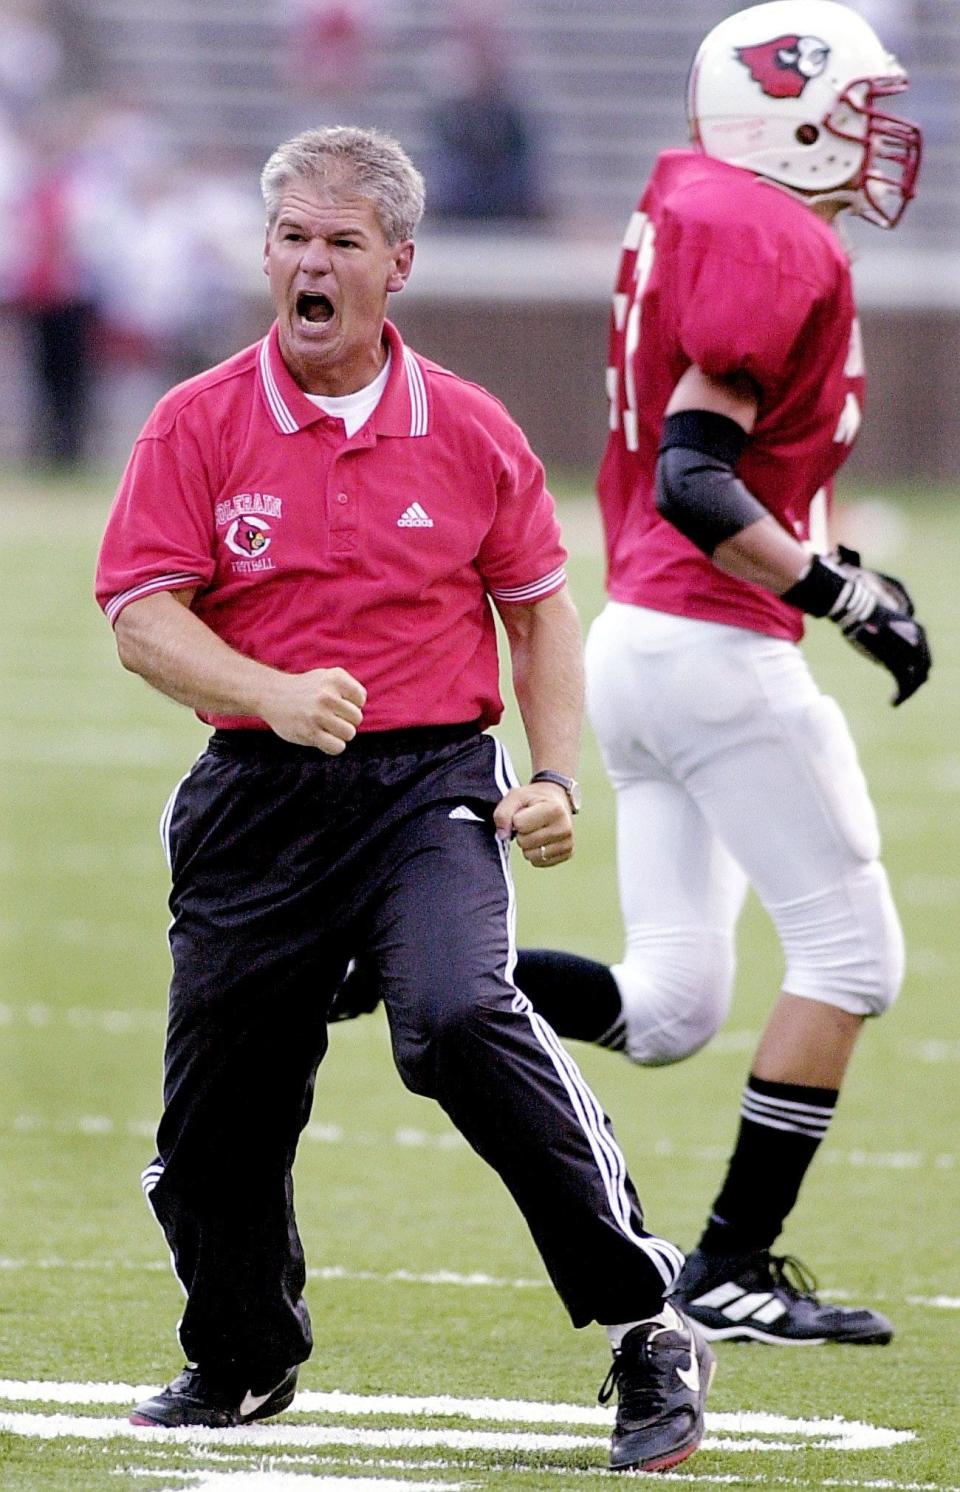 Then Colerain head coach Kerry Coombs cheers his defense as they leave the field during their game against Elder at the Crosstown Showdown at Nippert Stadium. Coombs' defense recovered a fumble to keep Elder from scoring in that play Aug. 26, 2000.